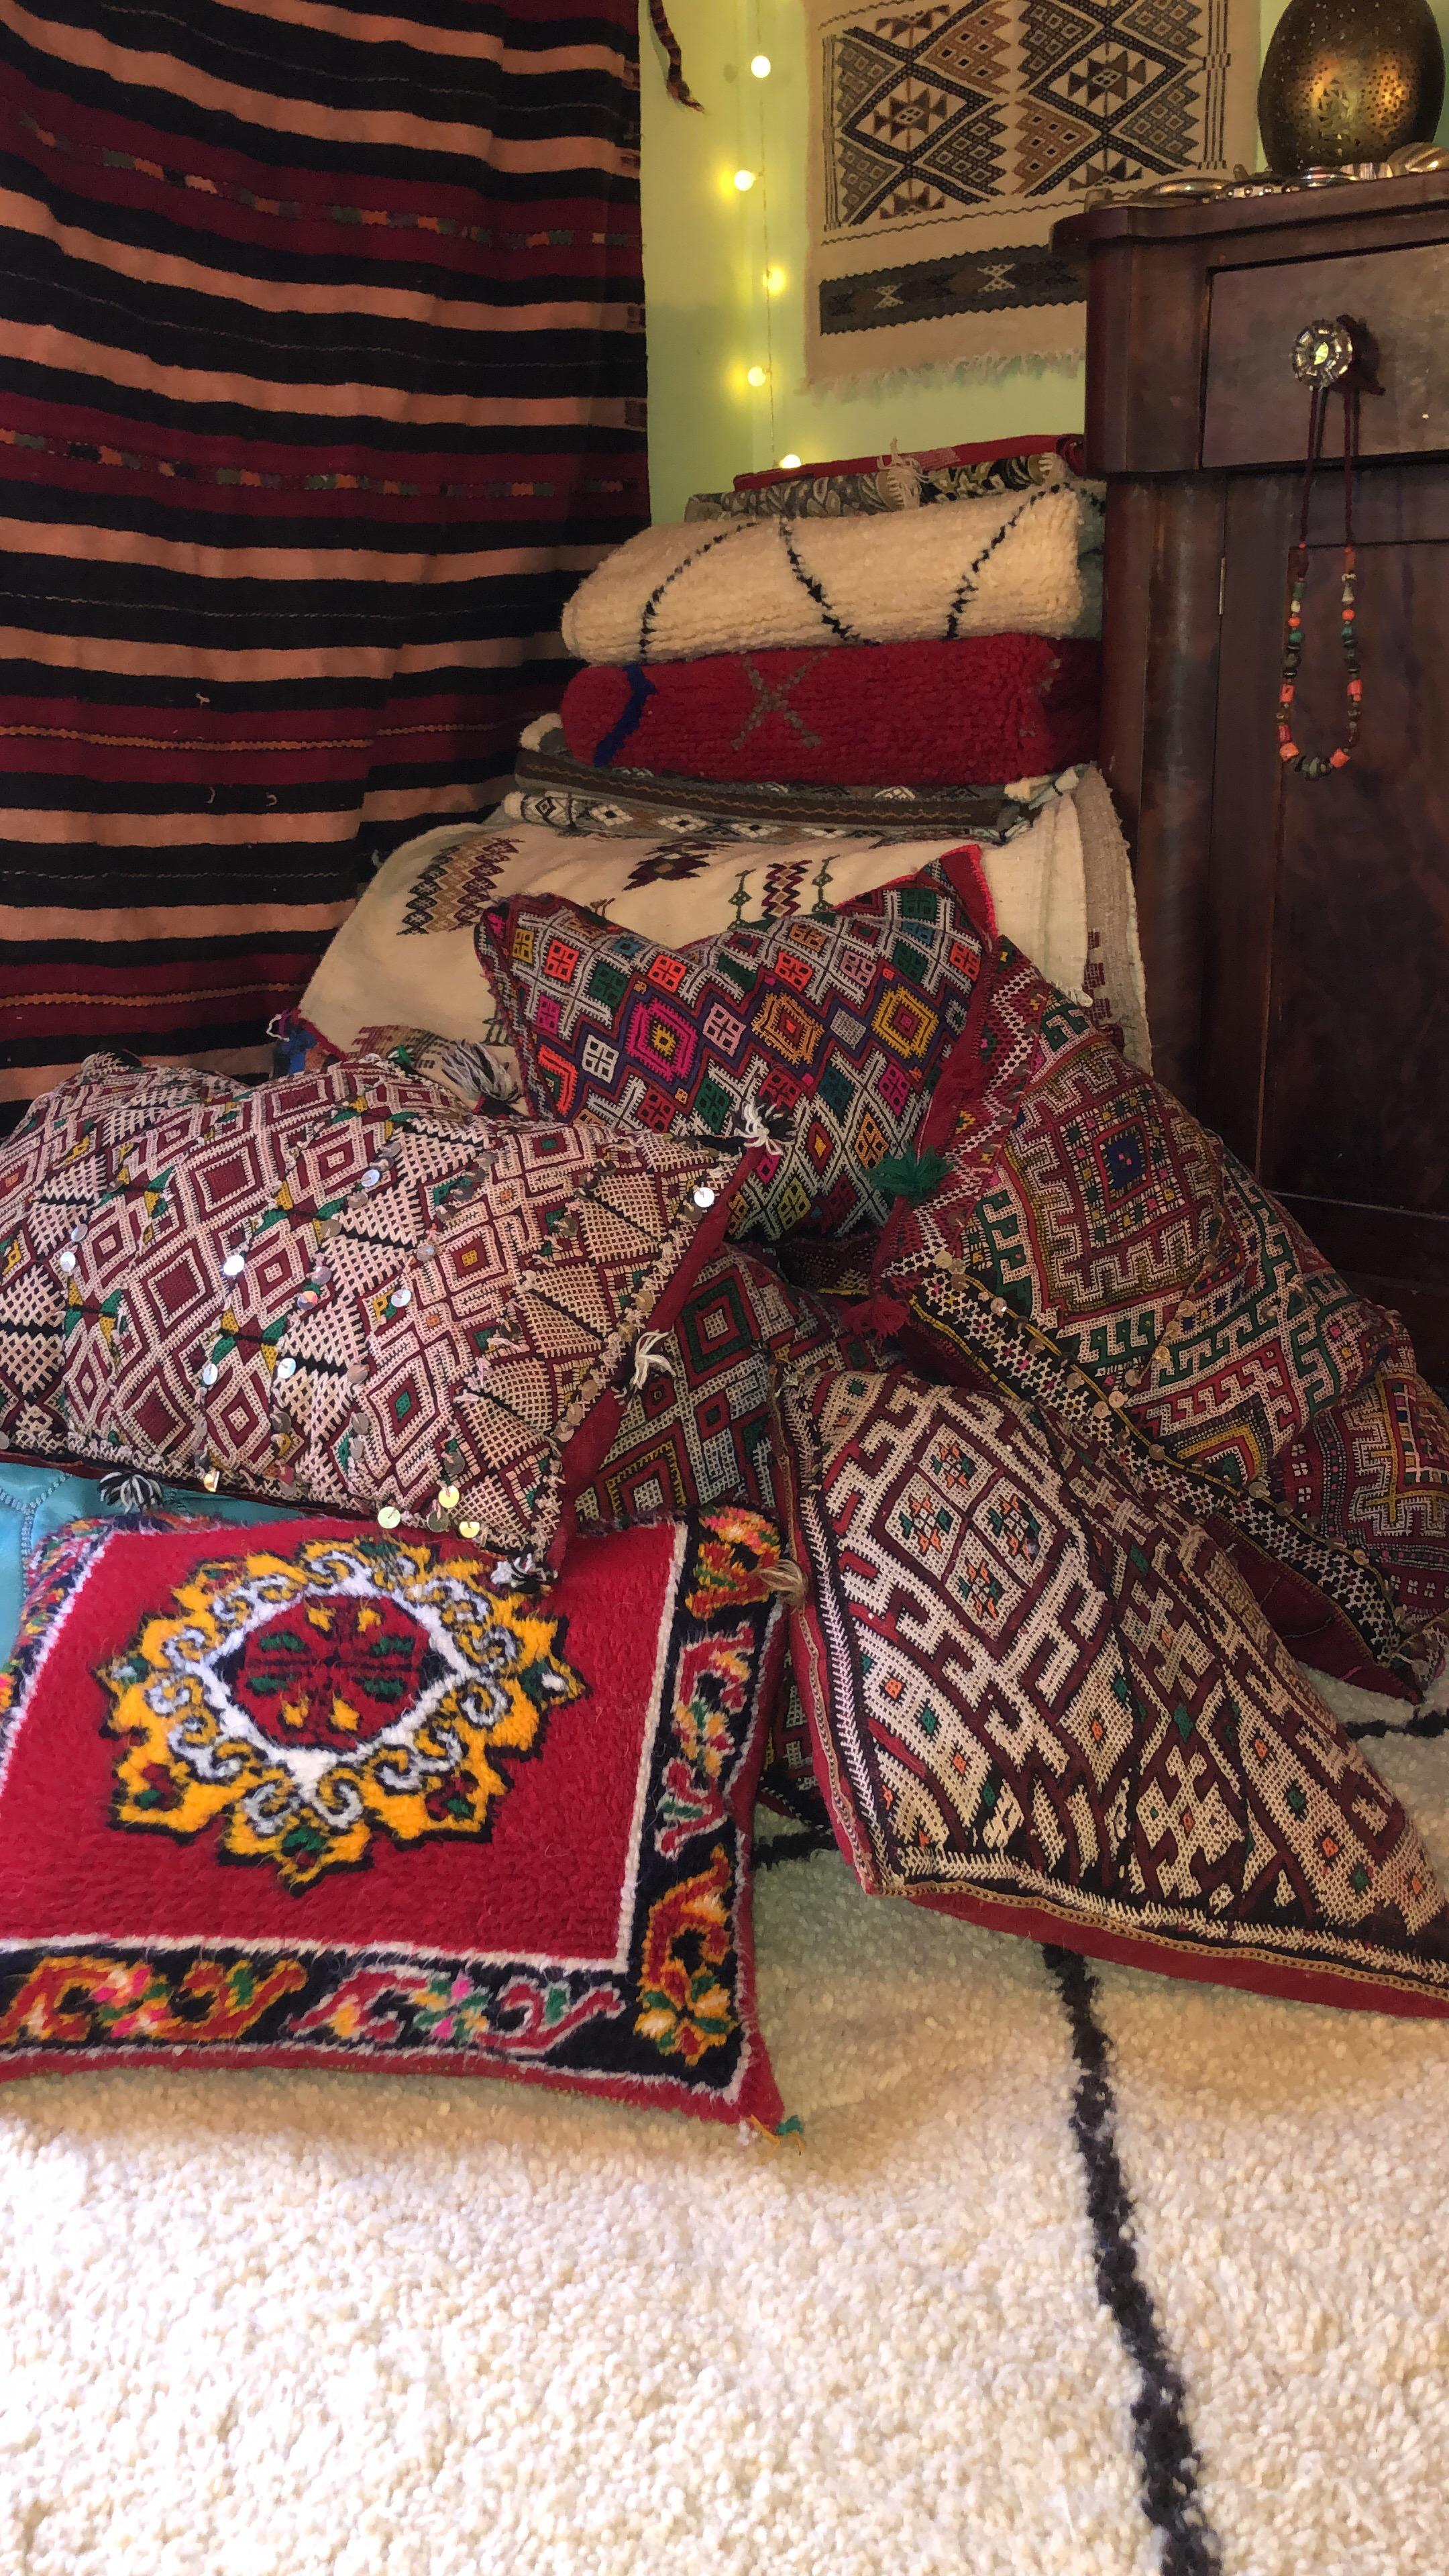 This complex handmade pillow adds an exotic Bohemian feel to any room. Decorated with geometric designs that mimic Berber tribal tattoos, as well as other symbolic imagery like the evil eye. Each pillow is one-of-a-kind, handwoven by Moroccan